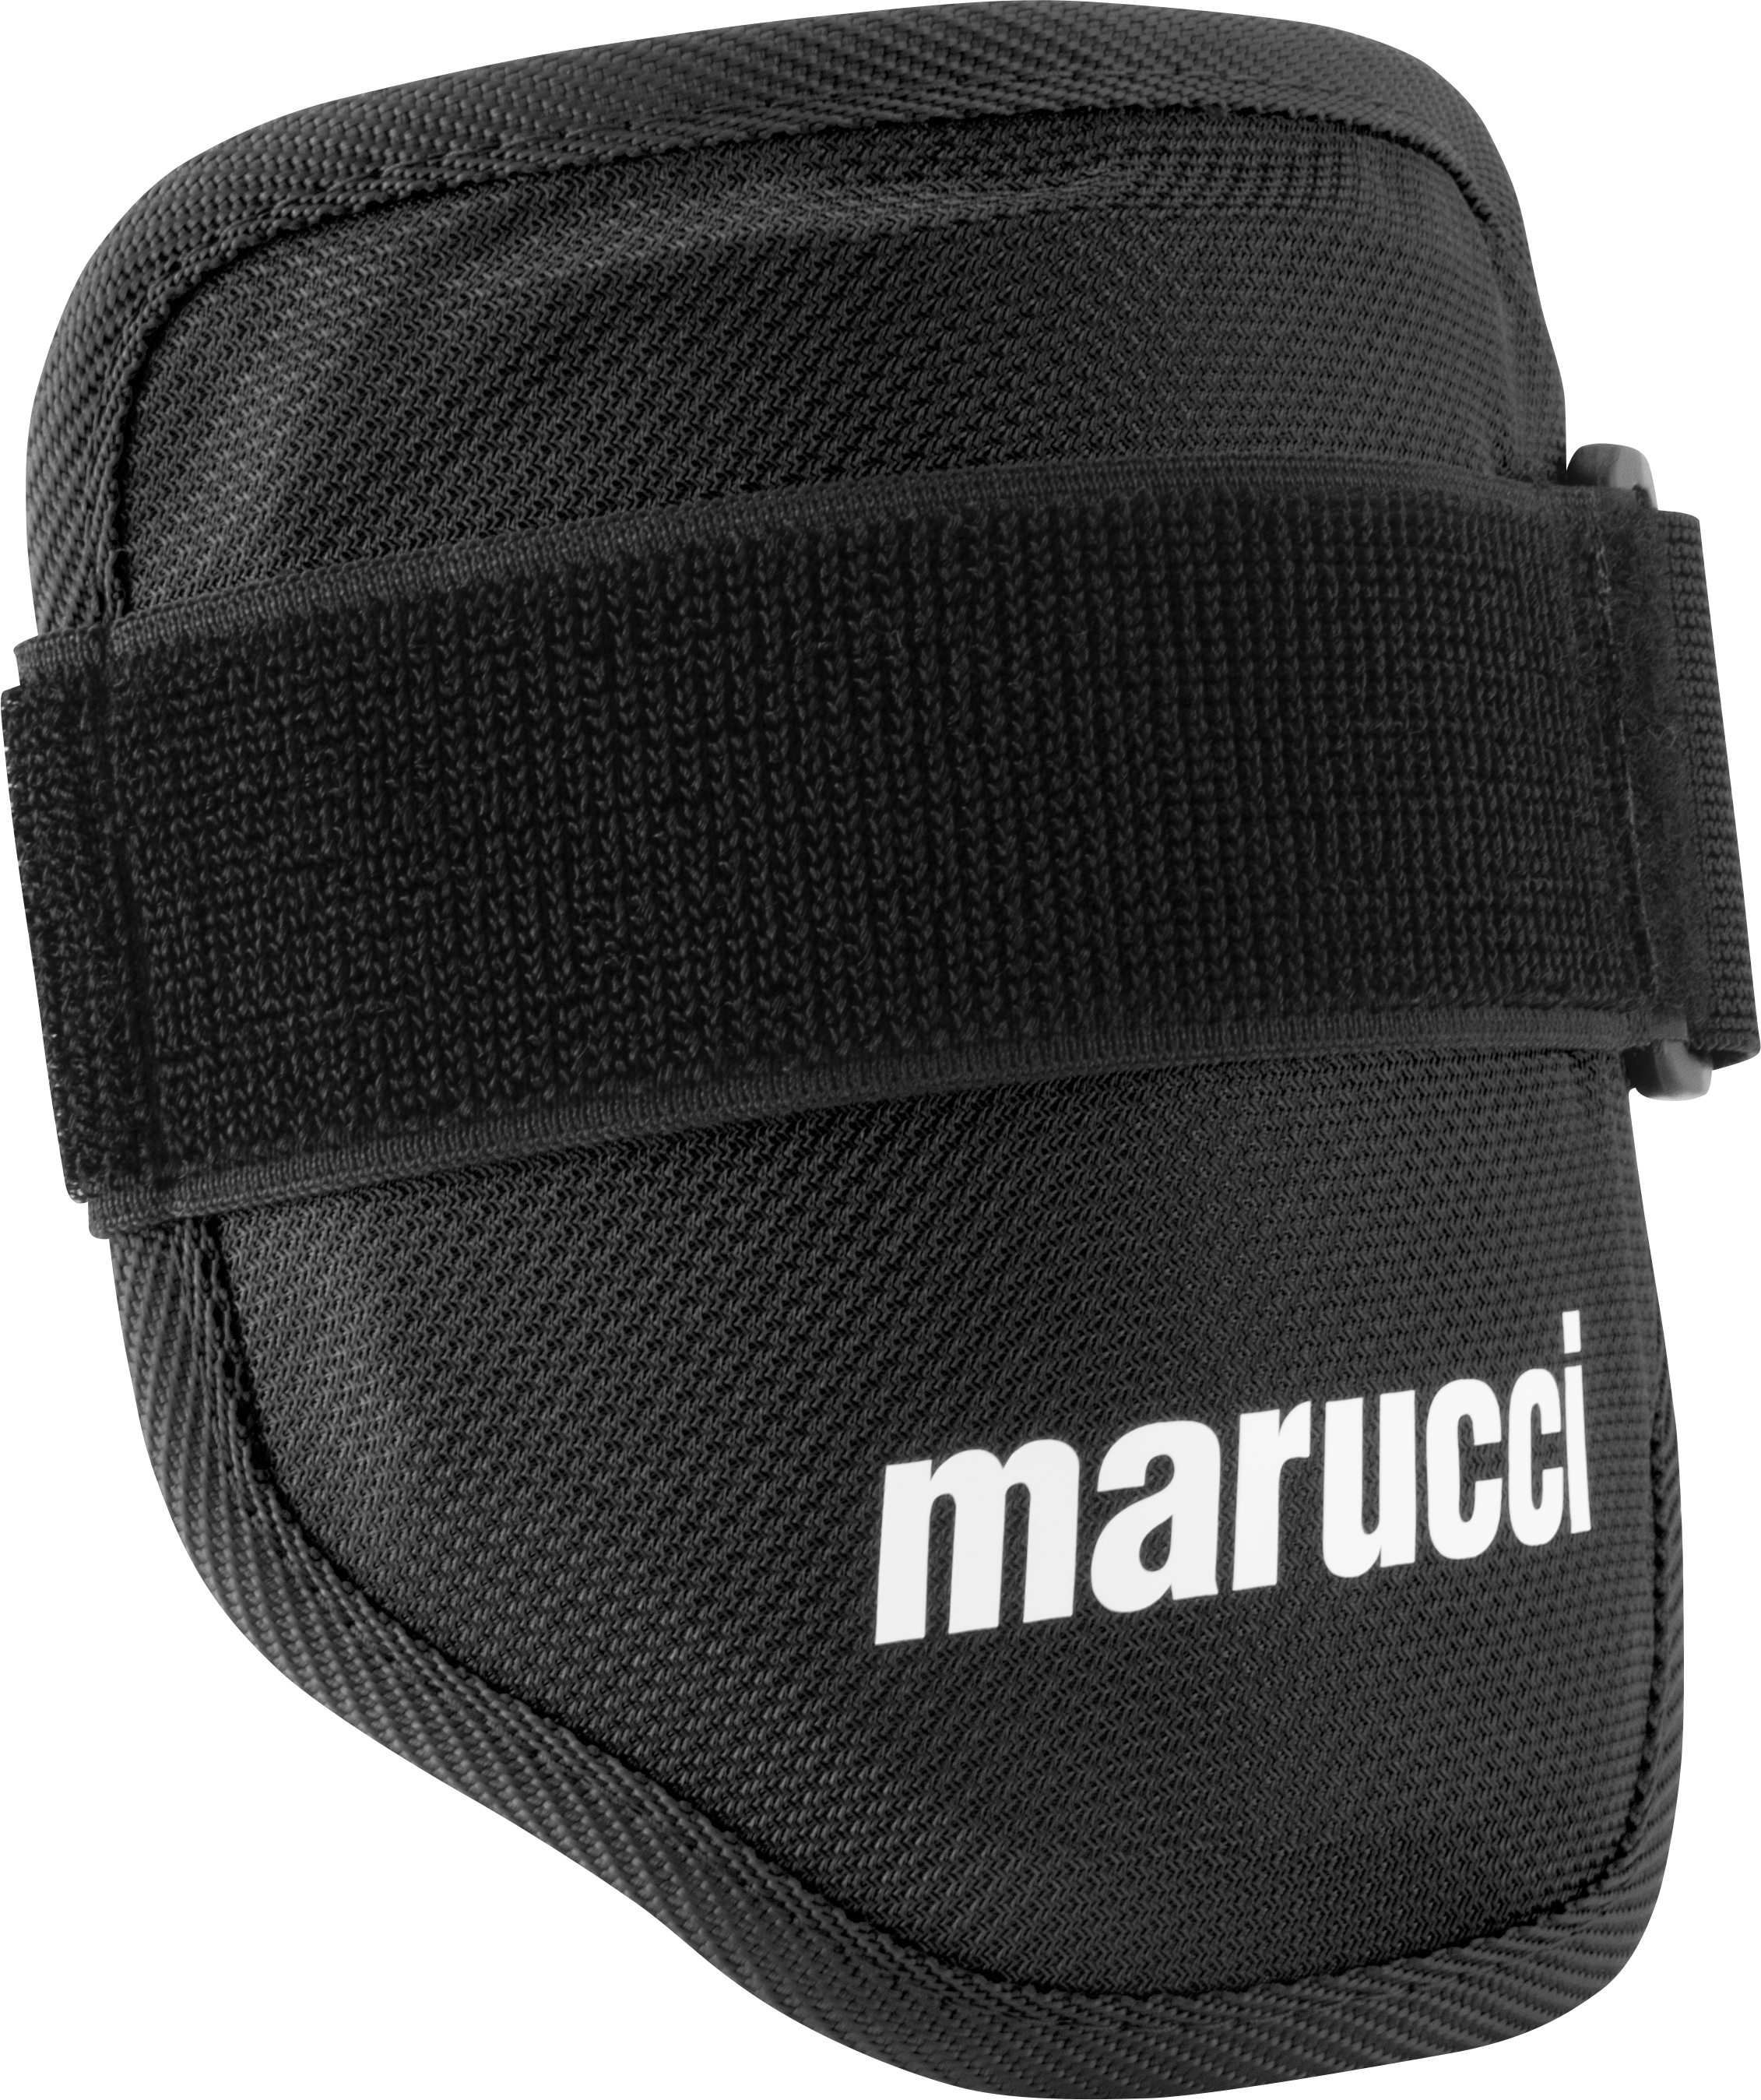 marucci-adult-elbow-guard-black-mpelbgrd2-bk-a-baseball-protective-equipment MPELBGRD2-BK-A Marucci 849817094679 <p>2019 Model MPELBGRD2-BK-A Consistency And Craftsmanship Commitment To Quality And Understanding